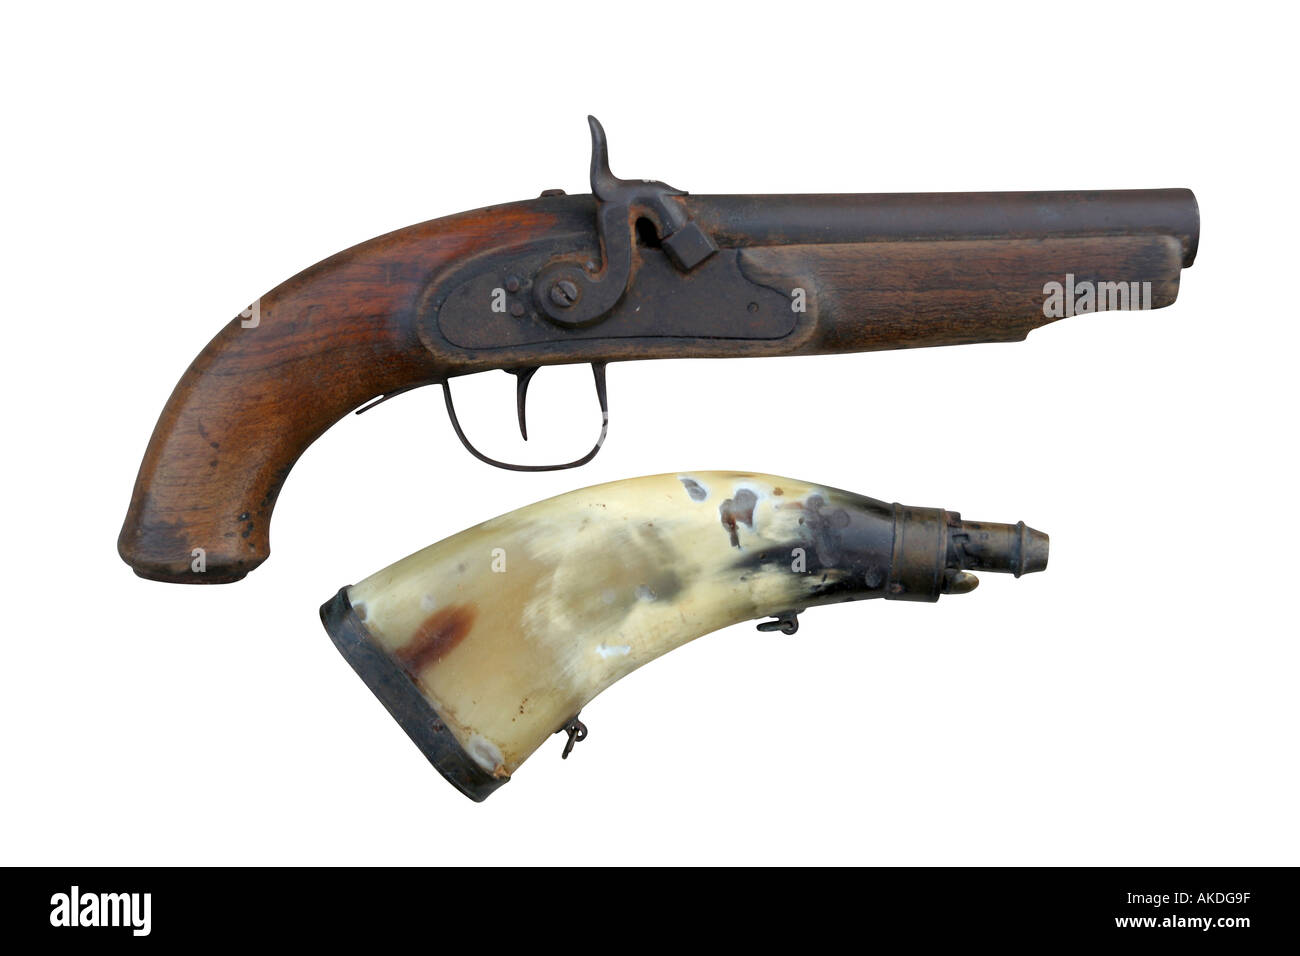 Antique pistol with powder horn Stock Photo